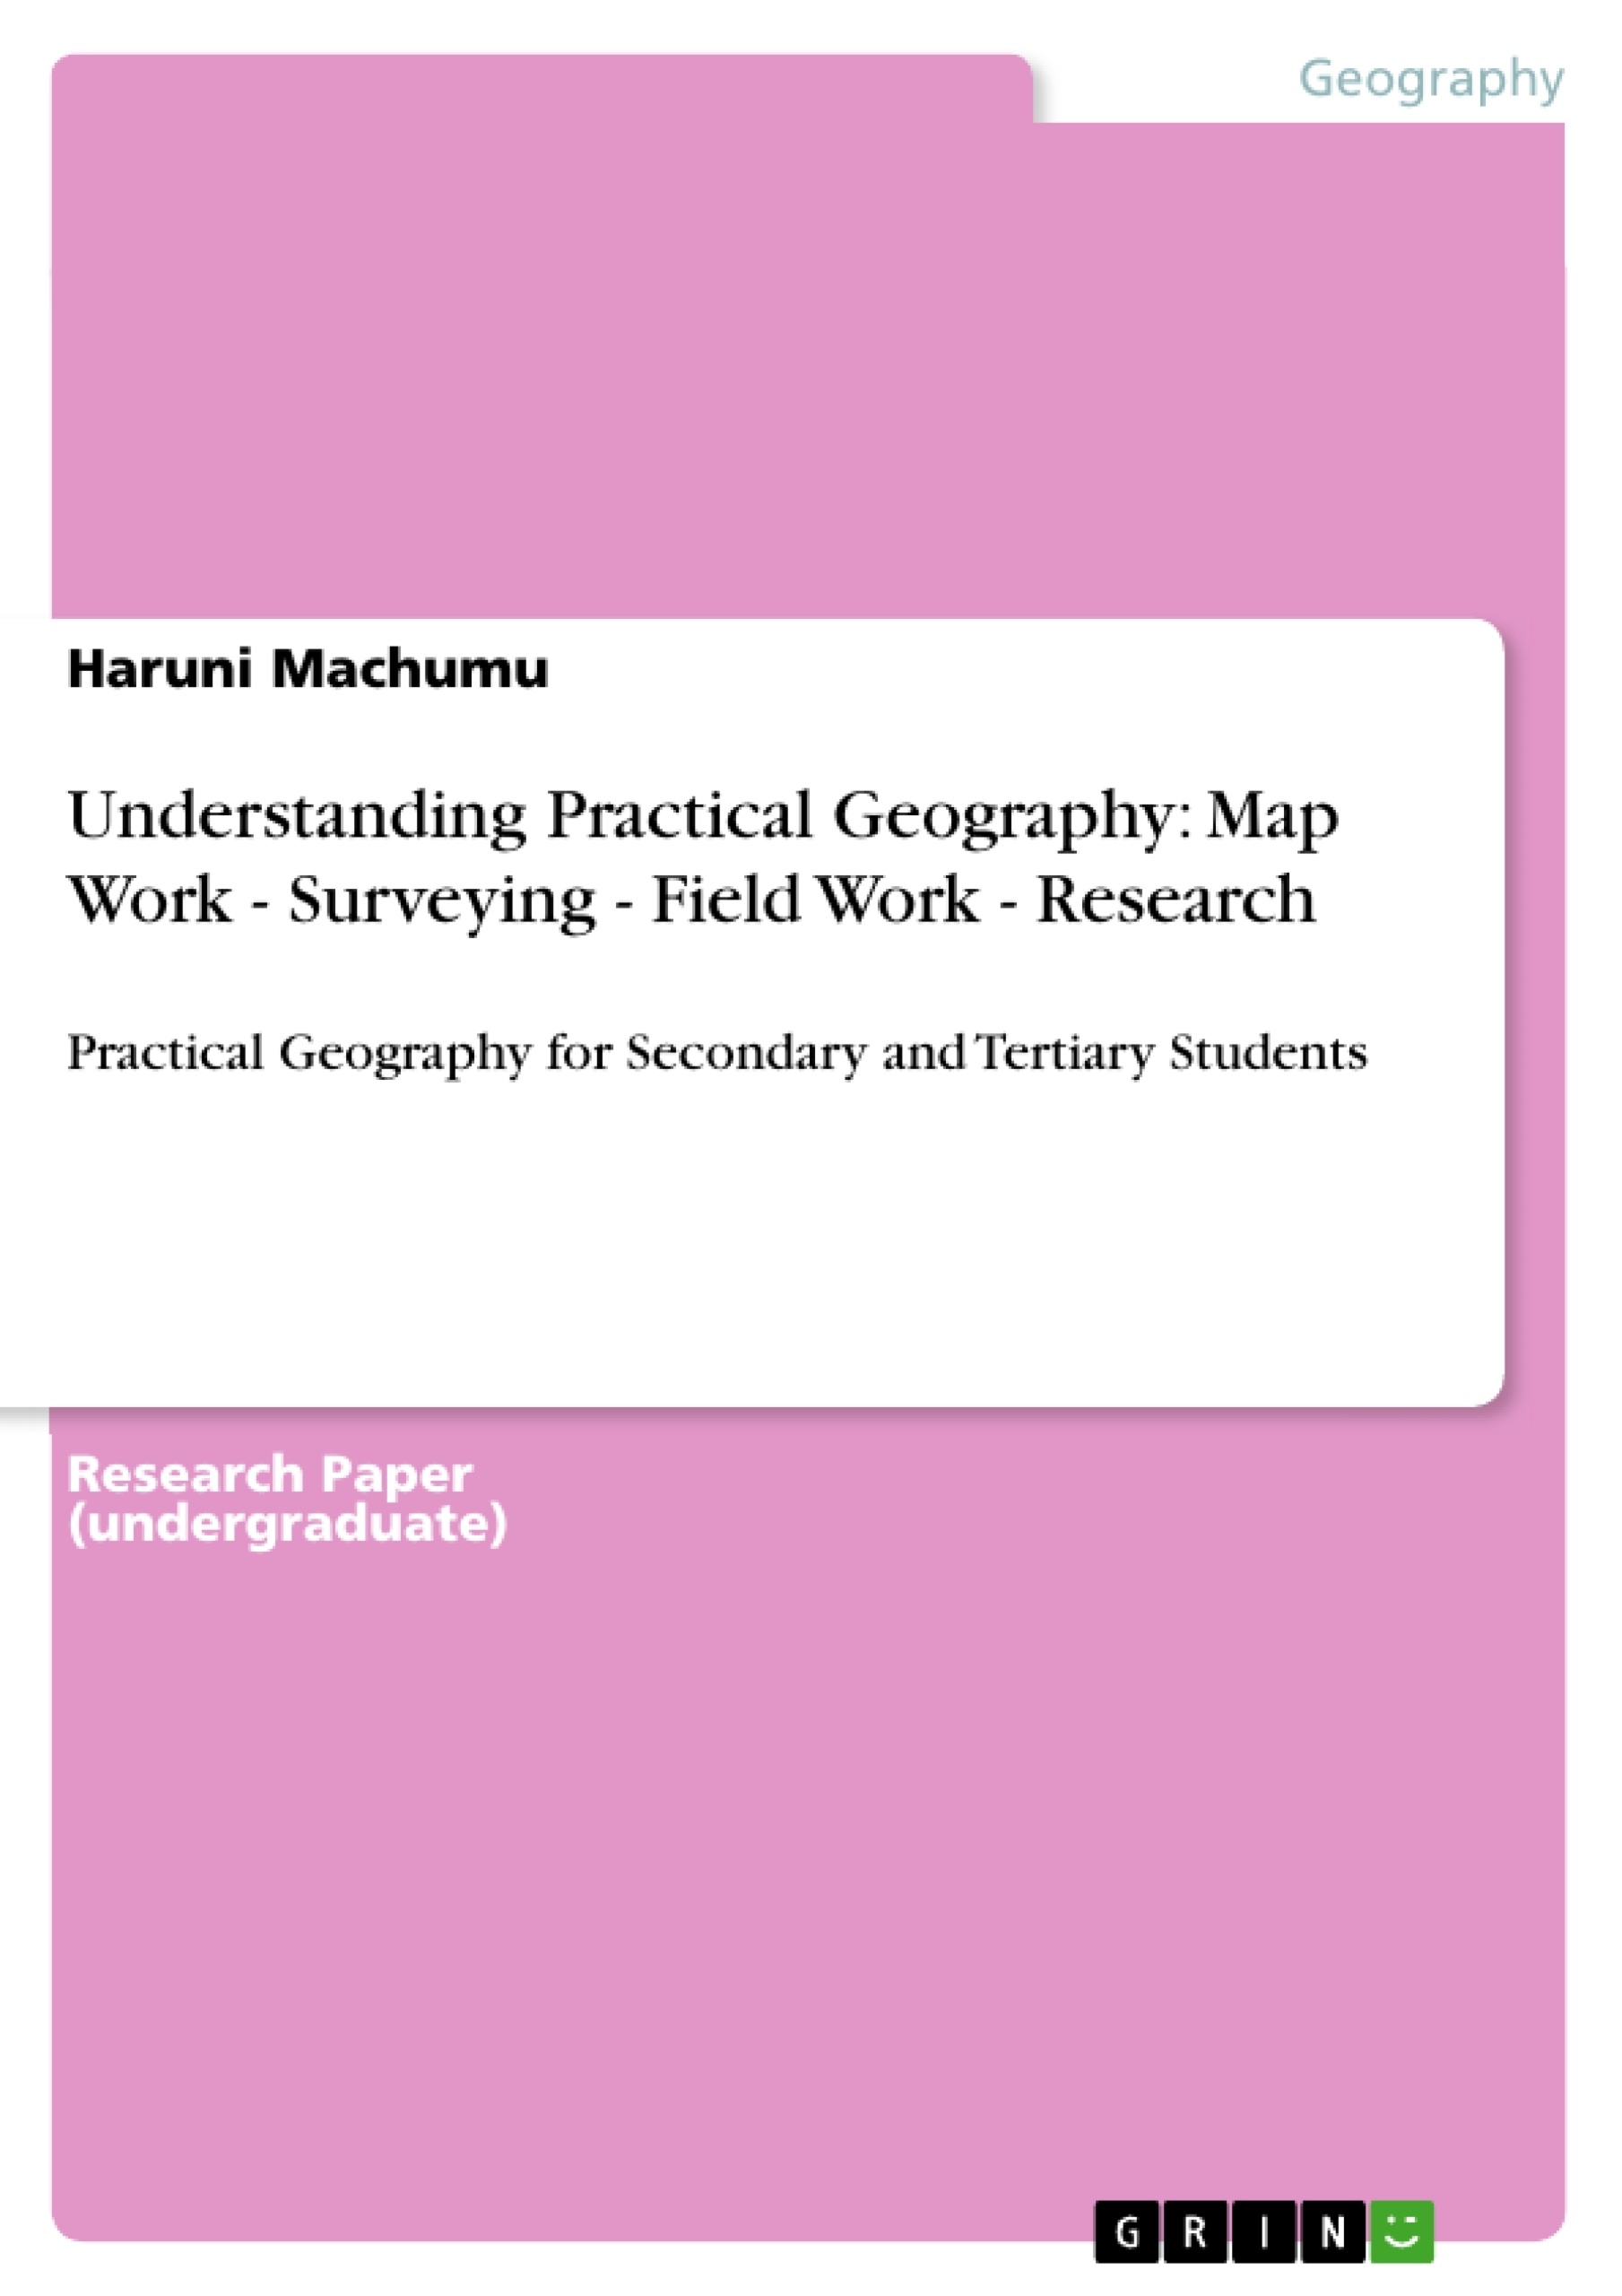 Título: Understanding Practical Geography: Map Work - Surveying - Field Work - Research